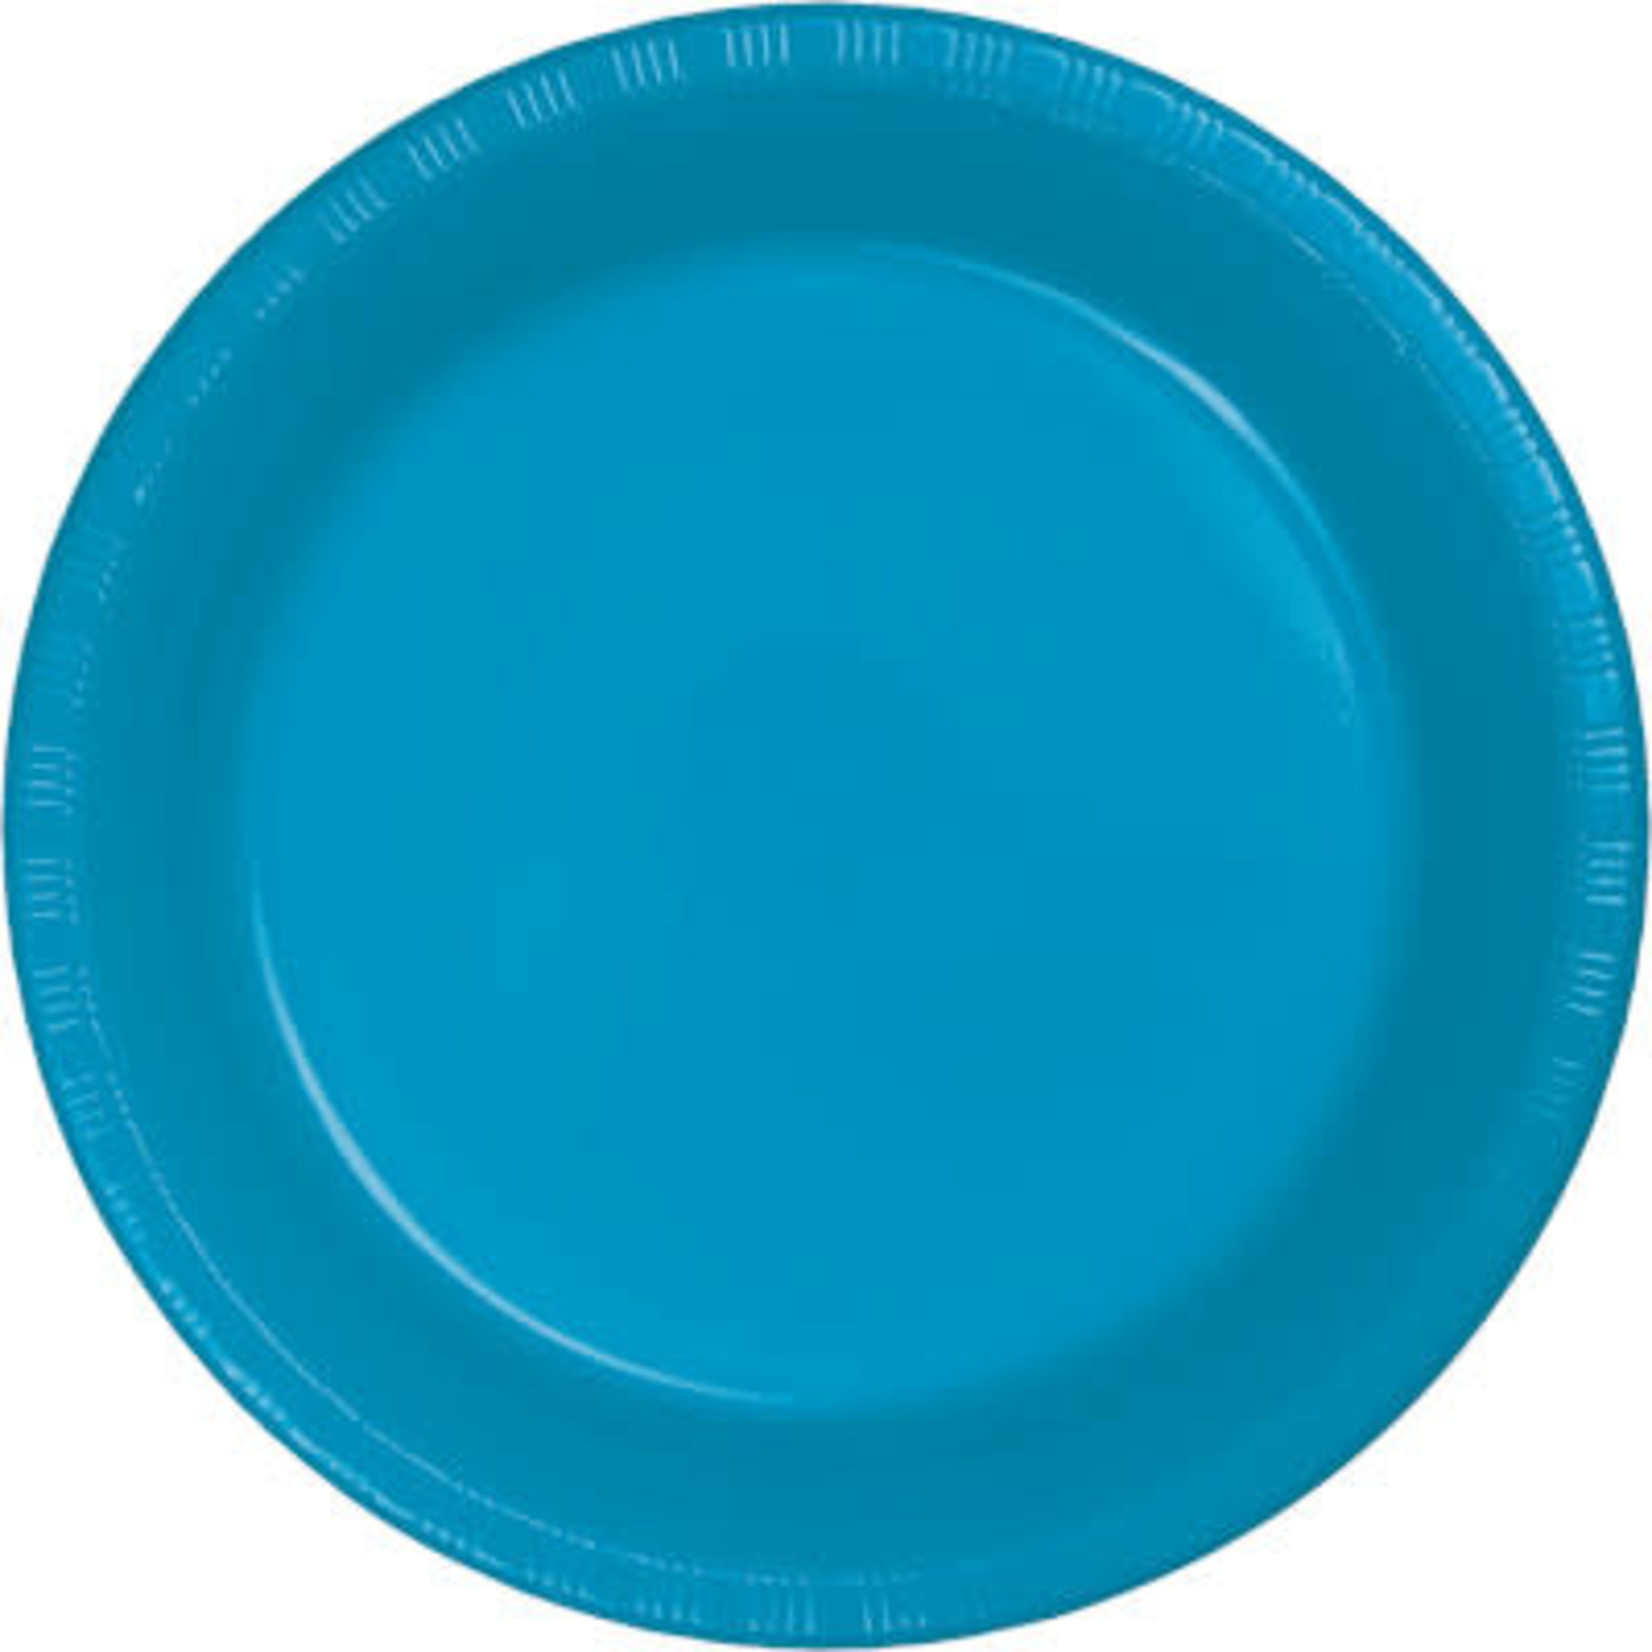 Touch of Color 10" Turquoise Blue Plastic Banquet Plates - 20ct.